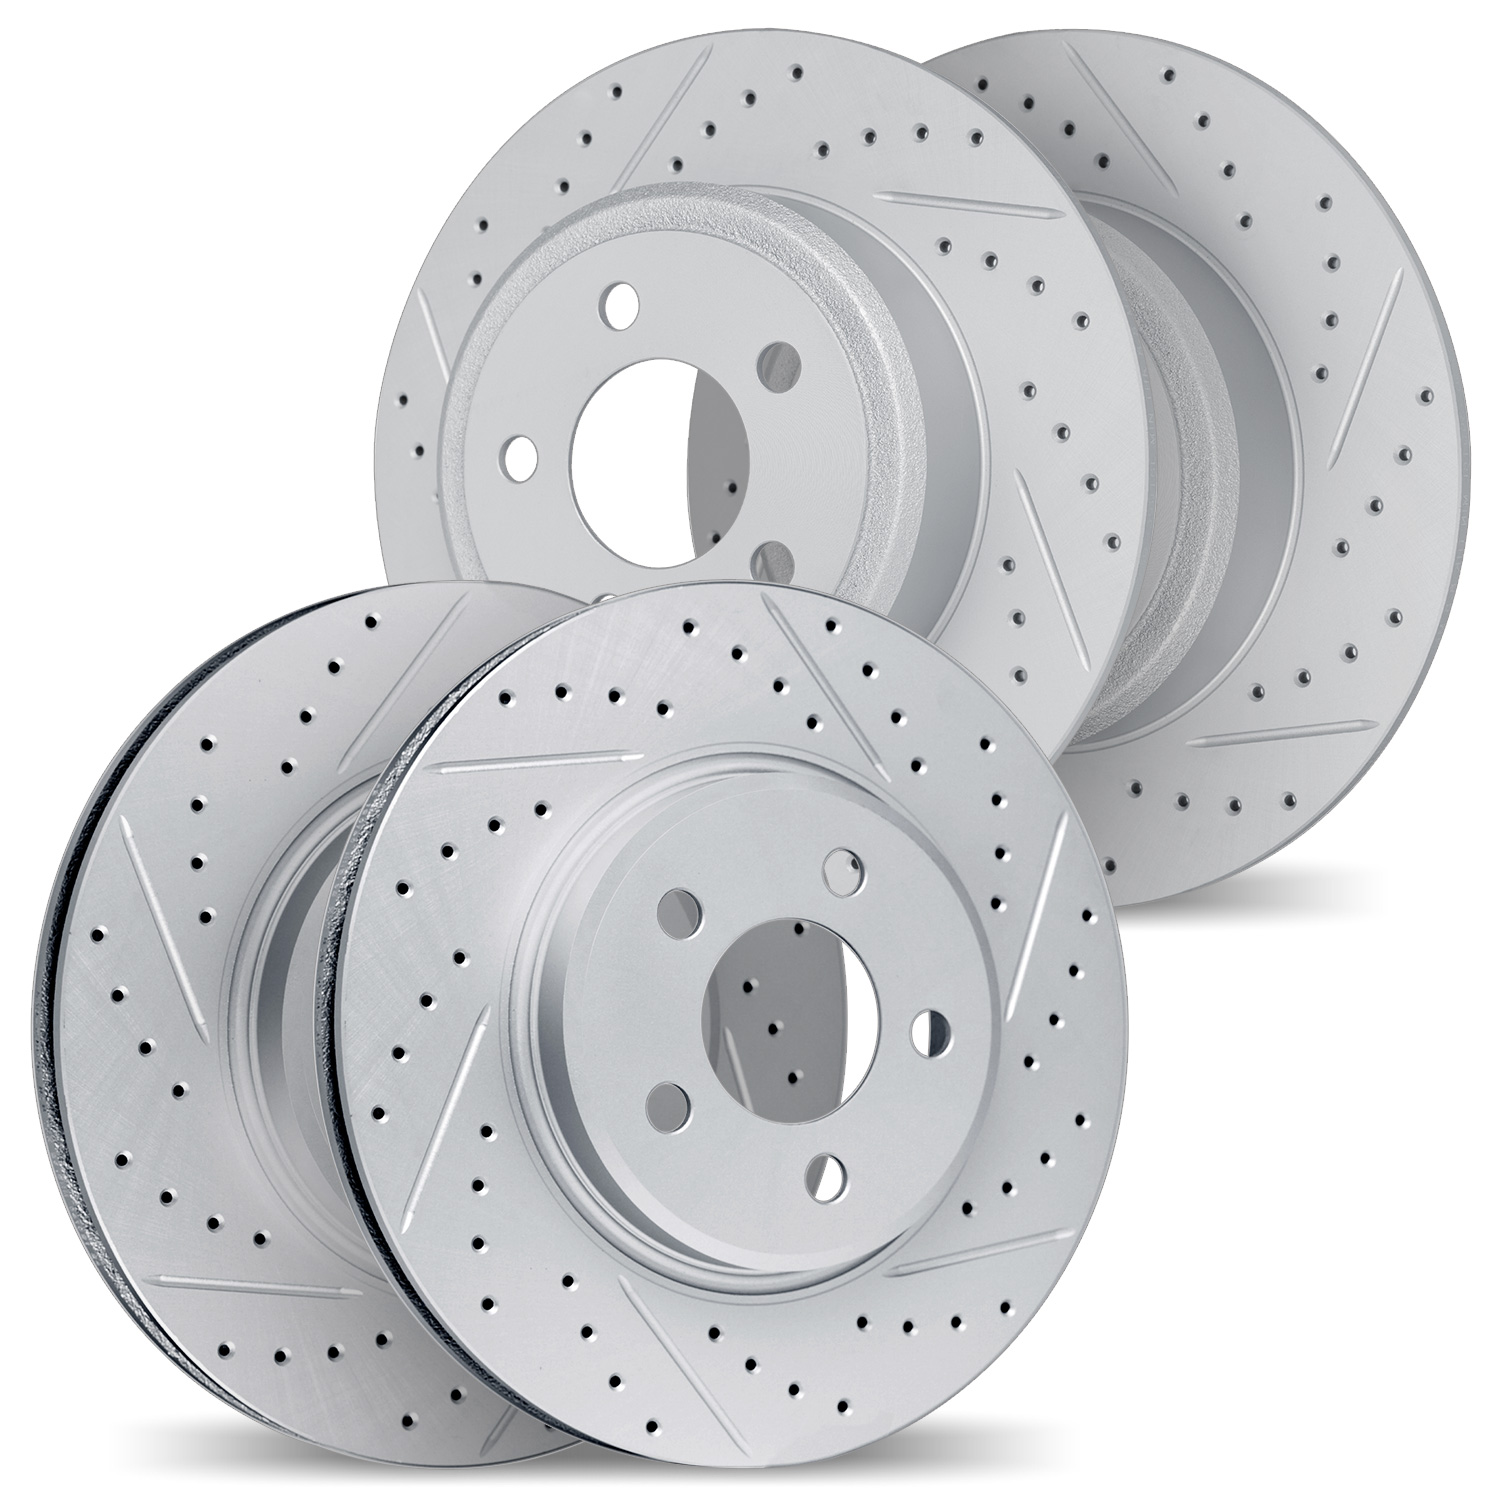 2004-80005 Geoperformance Drilled/Slotted Brake Rotors, 2004-2013 Ford/Lincoln/Mercury/Mazda, Position: Front and Rear